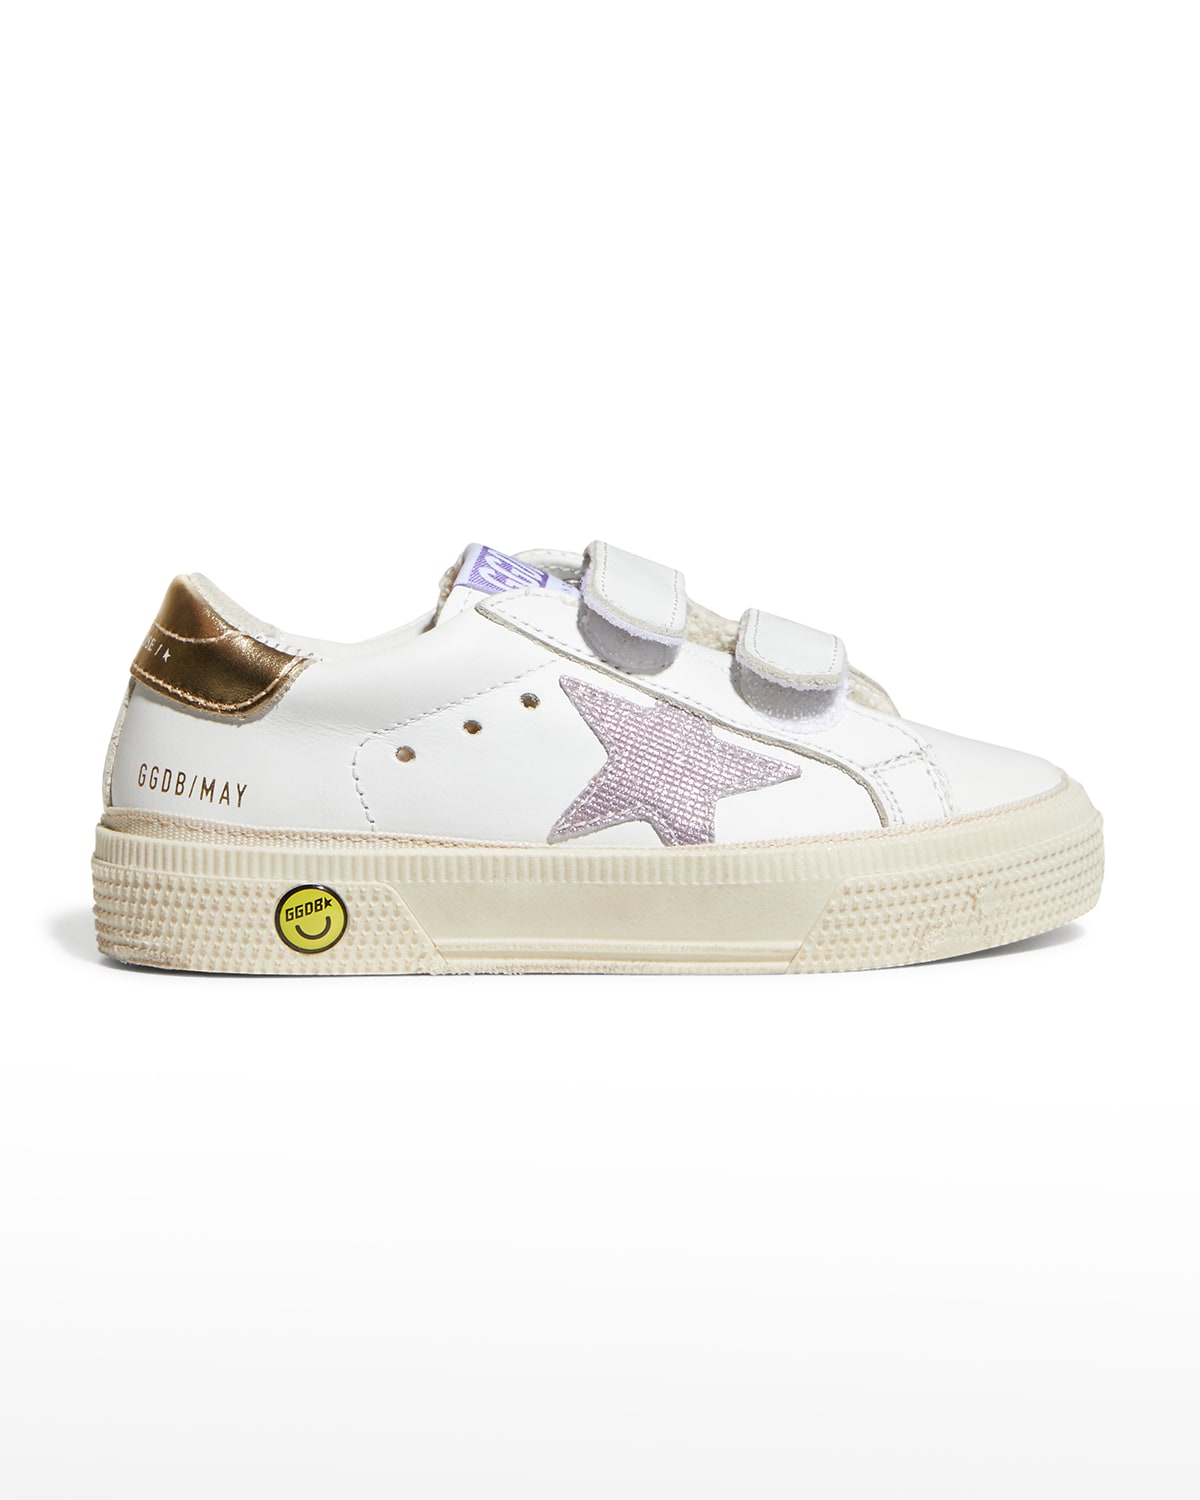 Golden Goose Kids' Girl's Checkered Glitter Low-top Sneakers, Baby/toddlers In White/pink/gold